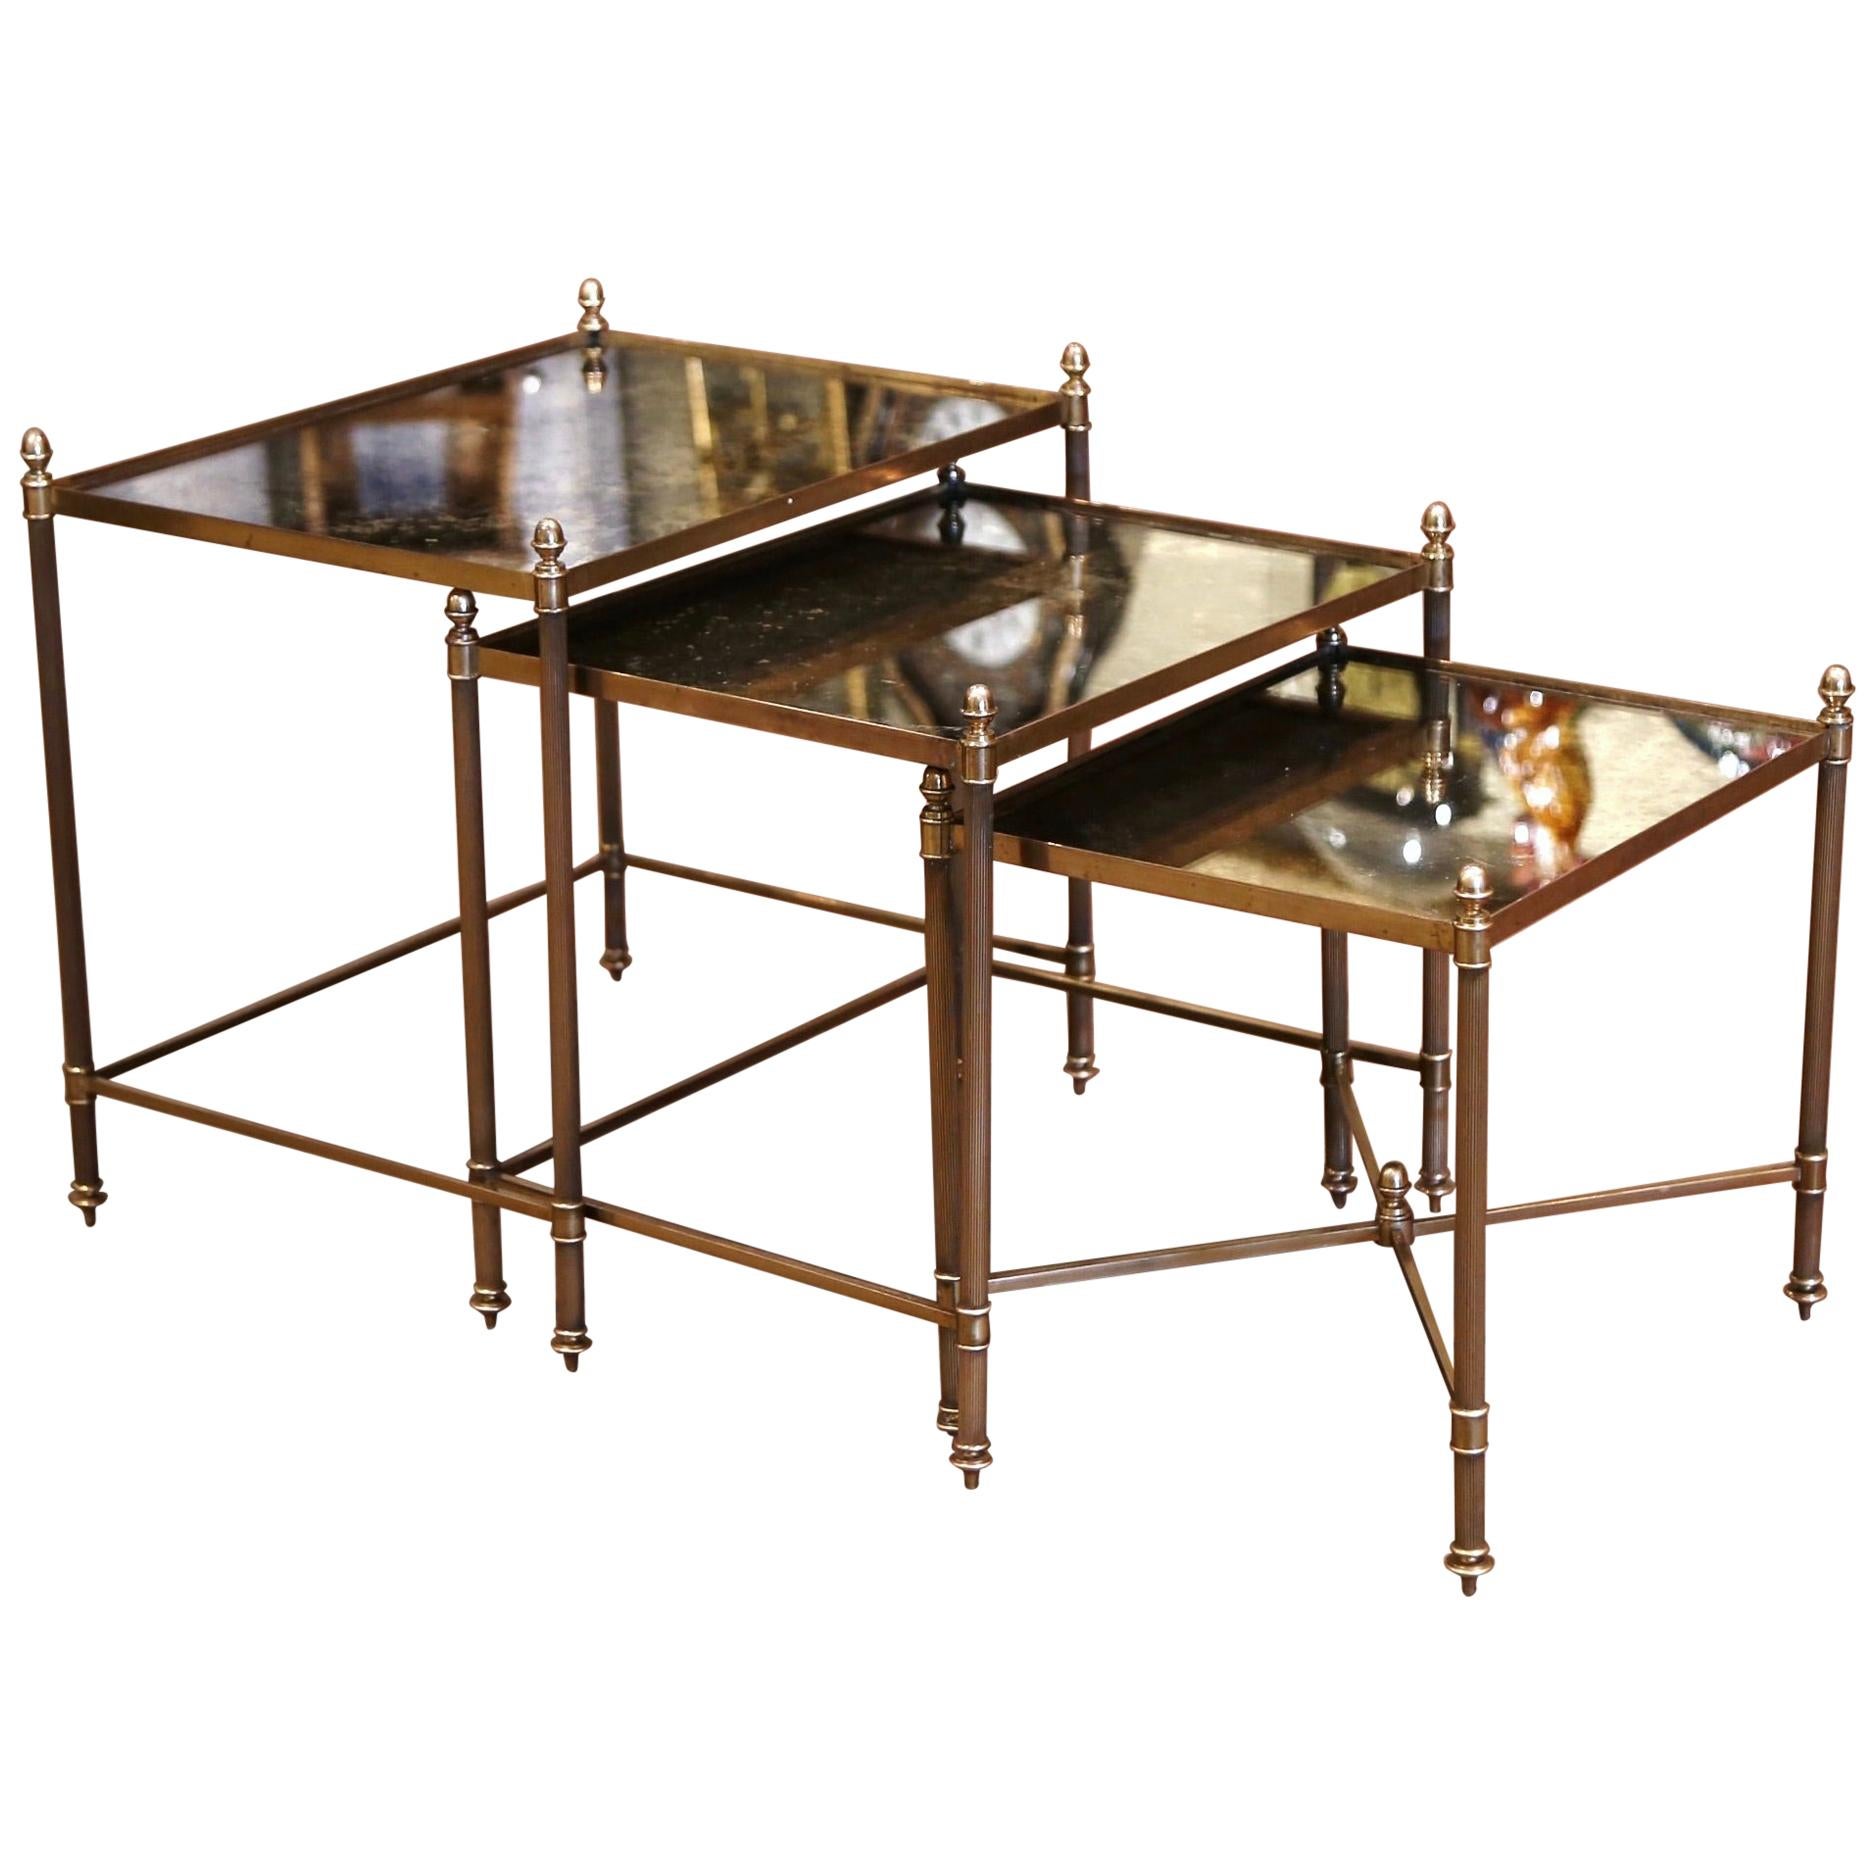 Midcentury French Brass and Églomisé Glass Nesting Tables from Maison Baguès